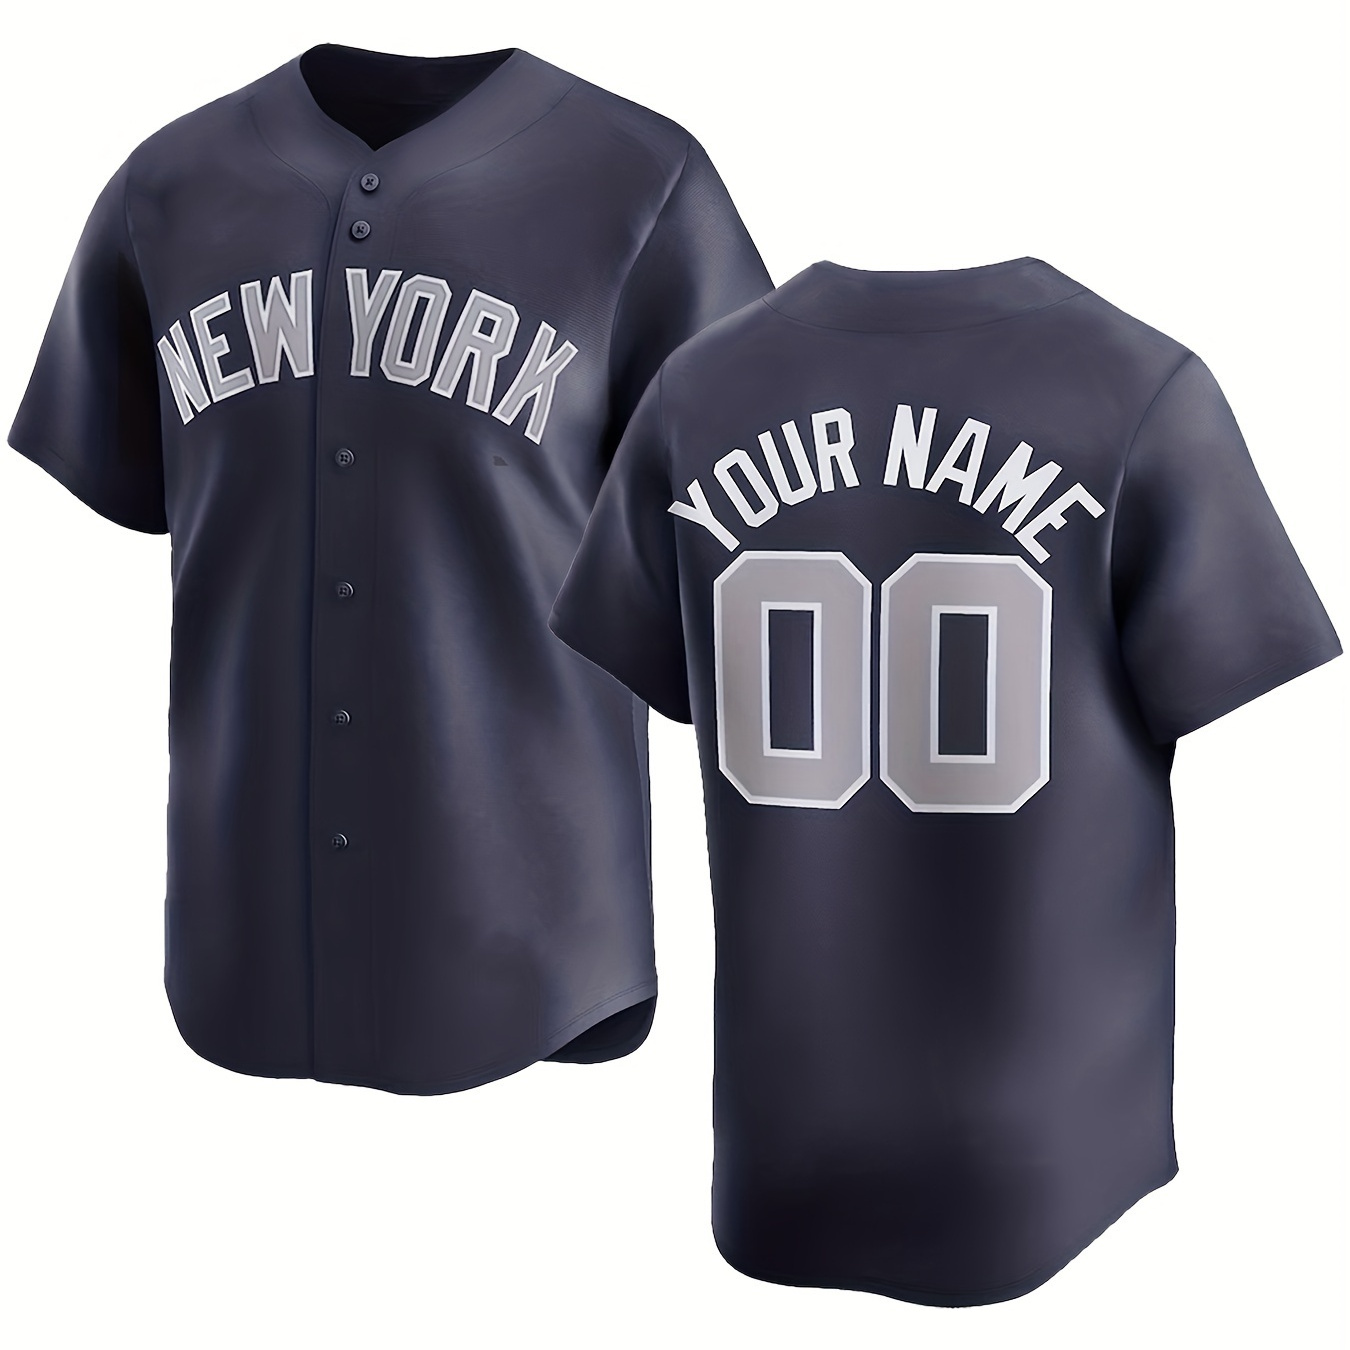 

Men's Customizable Name And Number Baseball Jersey Shirt, New York Print Comfortable Fit Breathable Sportswear, Personalized Party Training Match Clothing